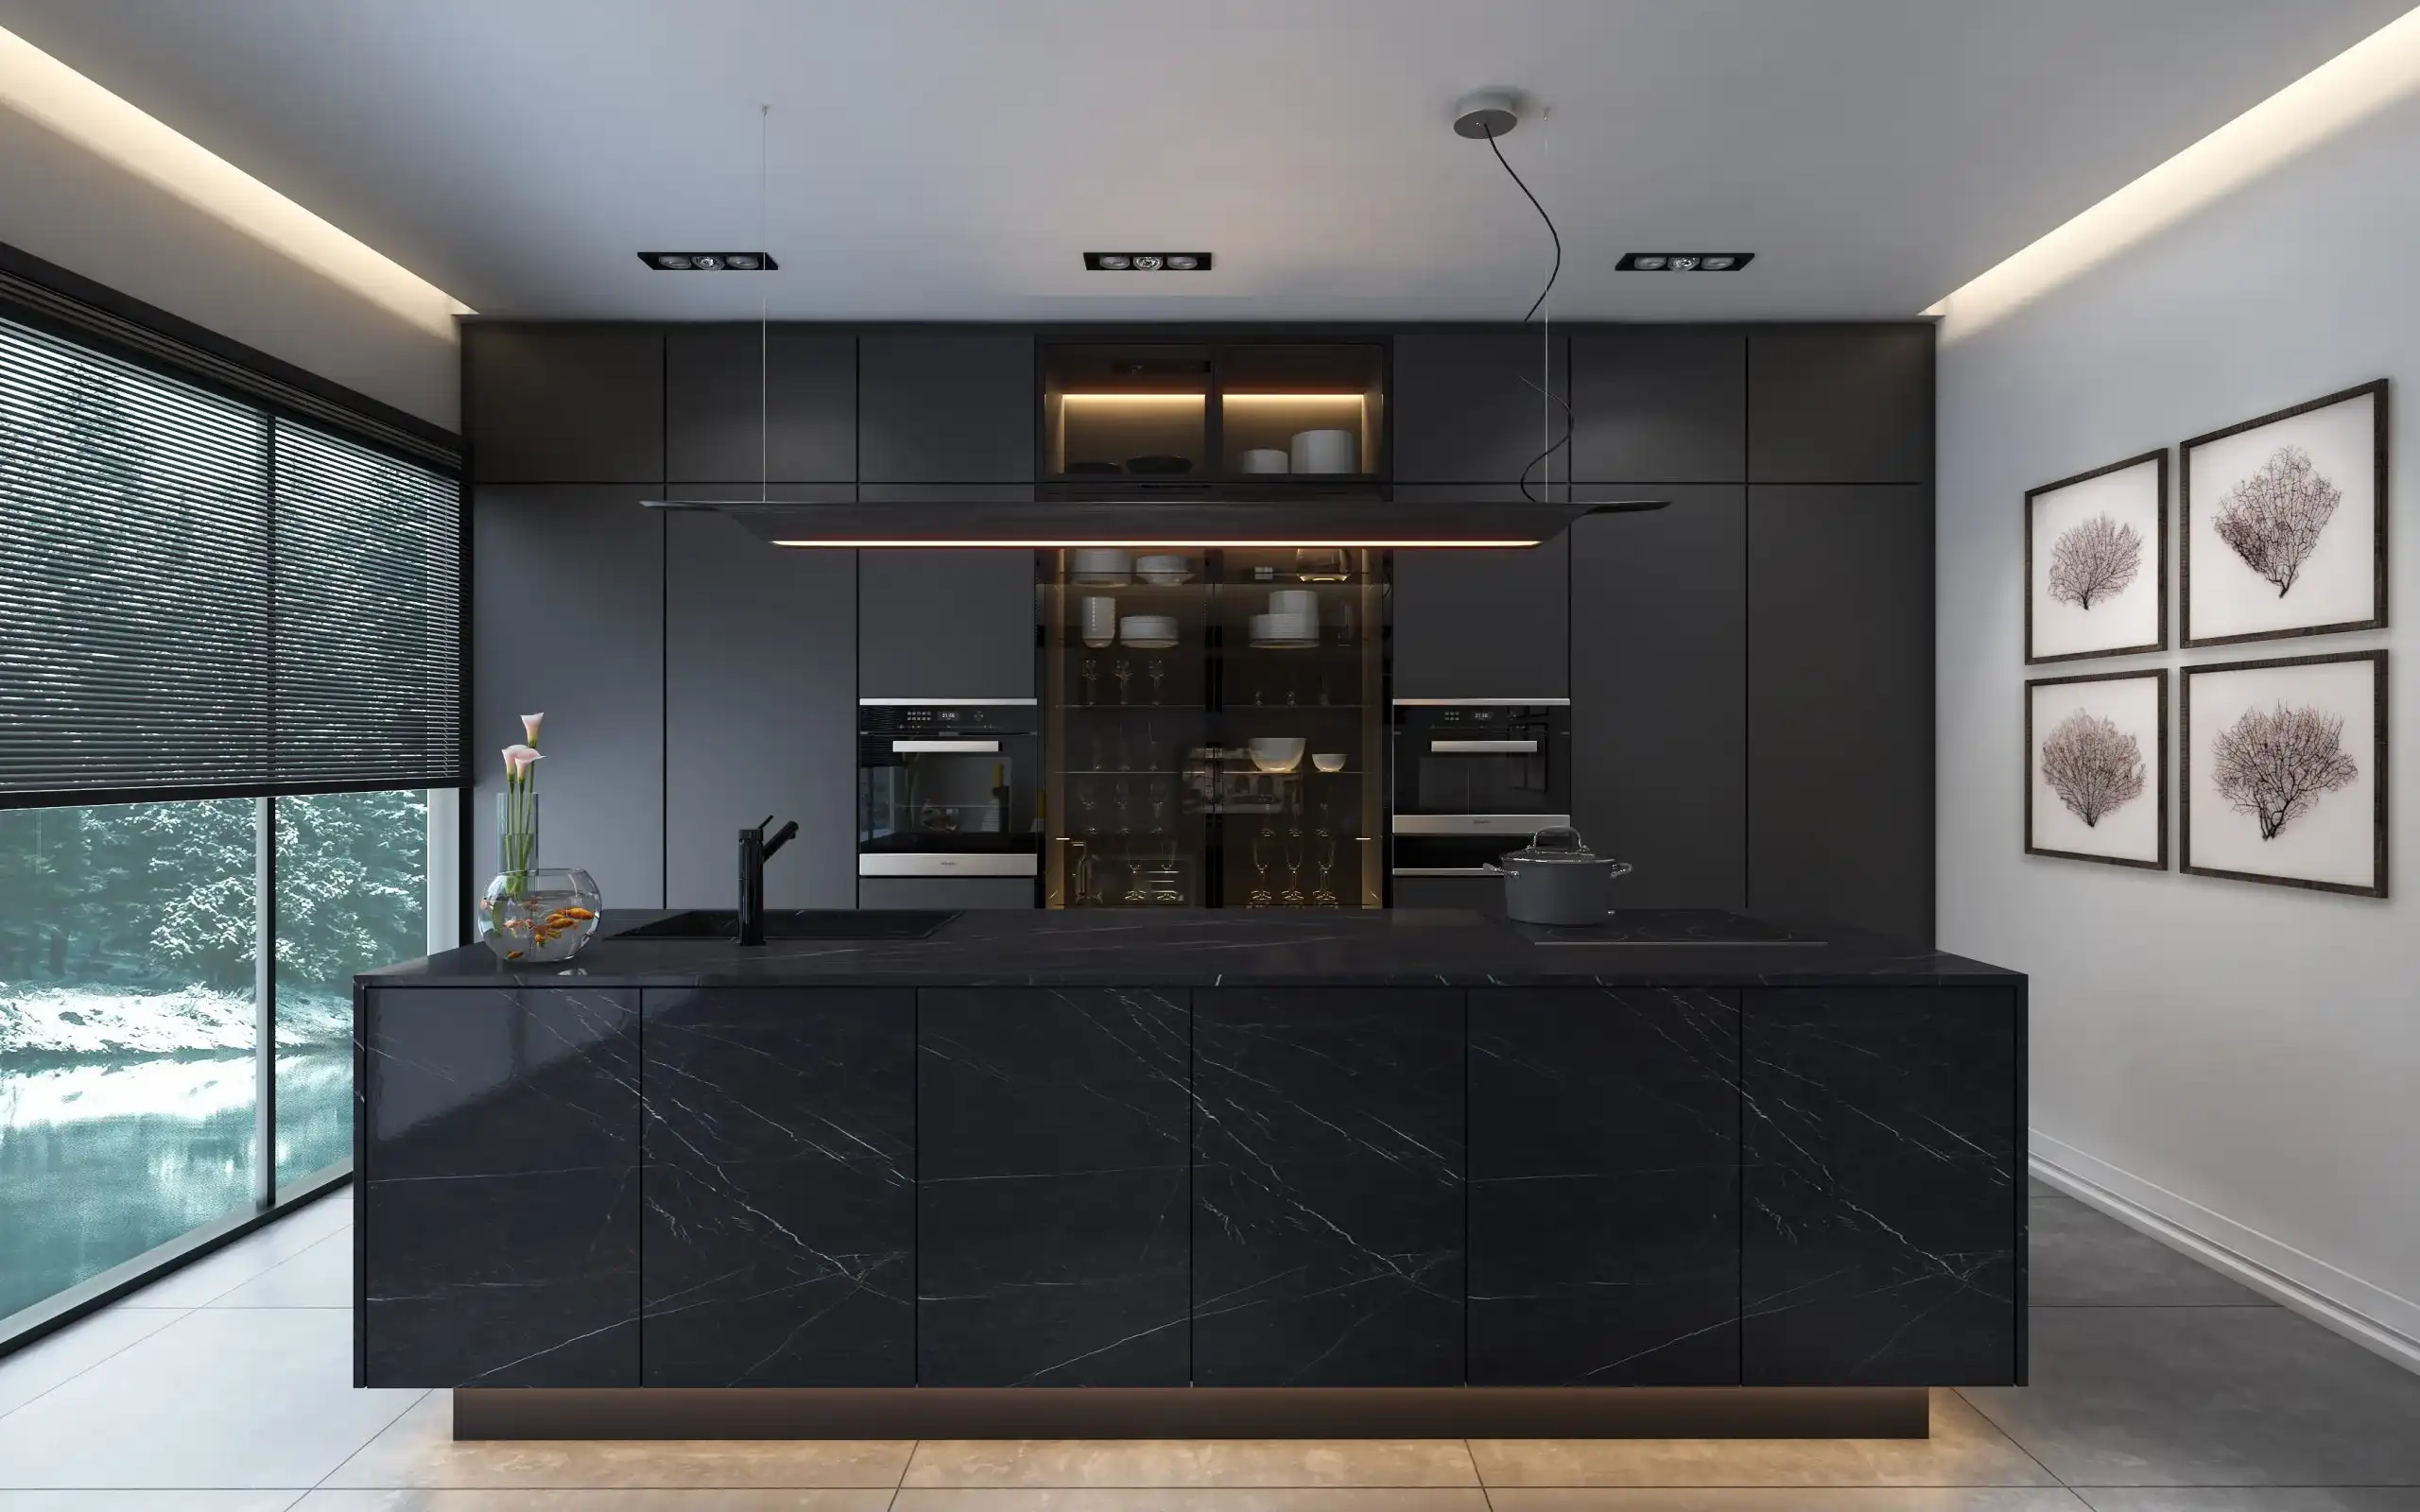 A modern kitchen with black marble counter tops.